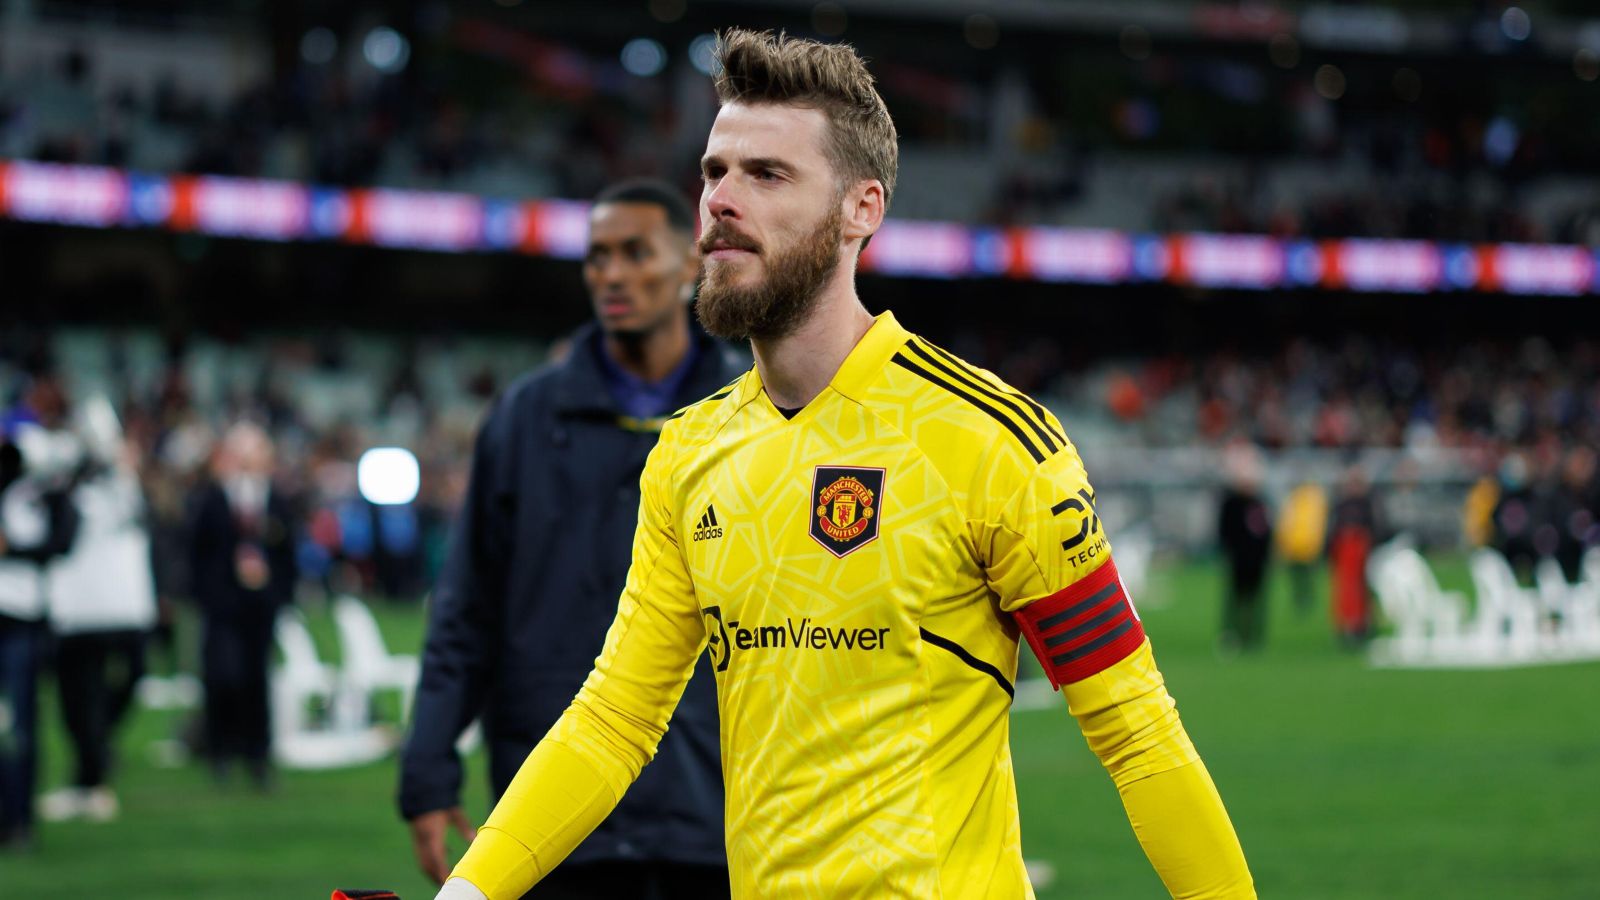 Inside Story of what happened between De Gea and Man United